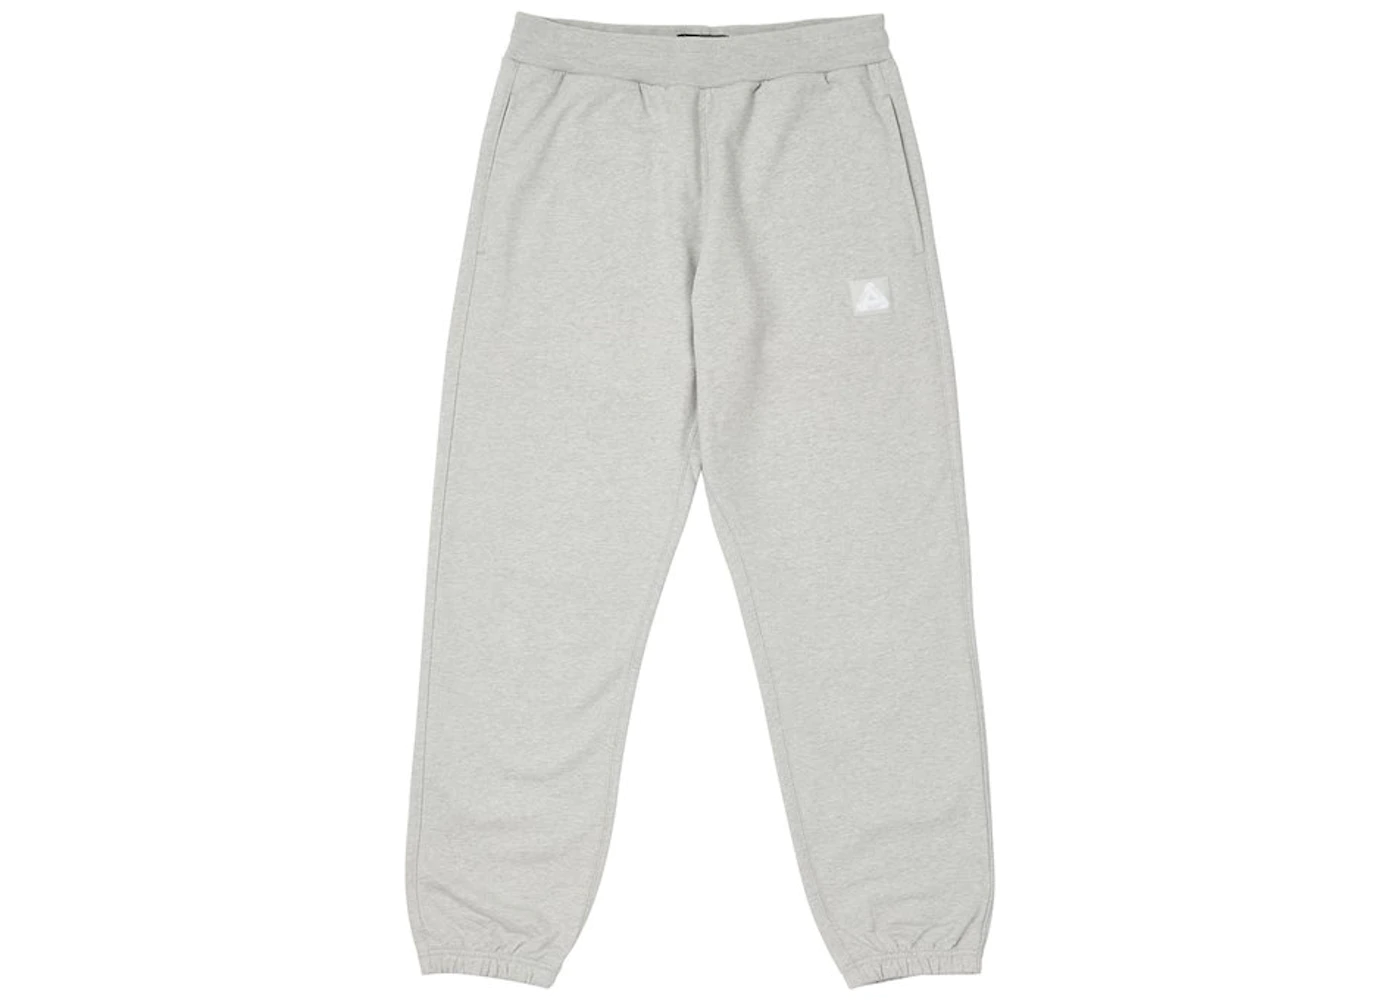 Palace Square Patch Joggers Grey Marl Men's - SS21 - US